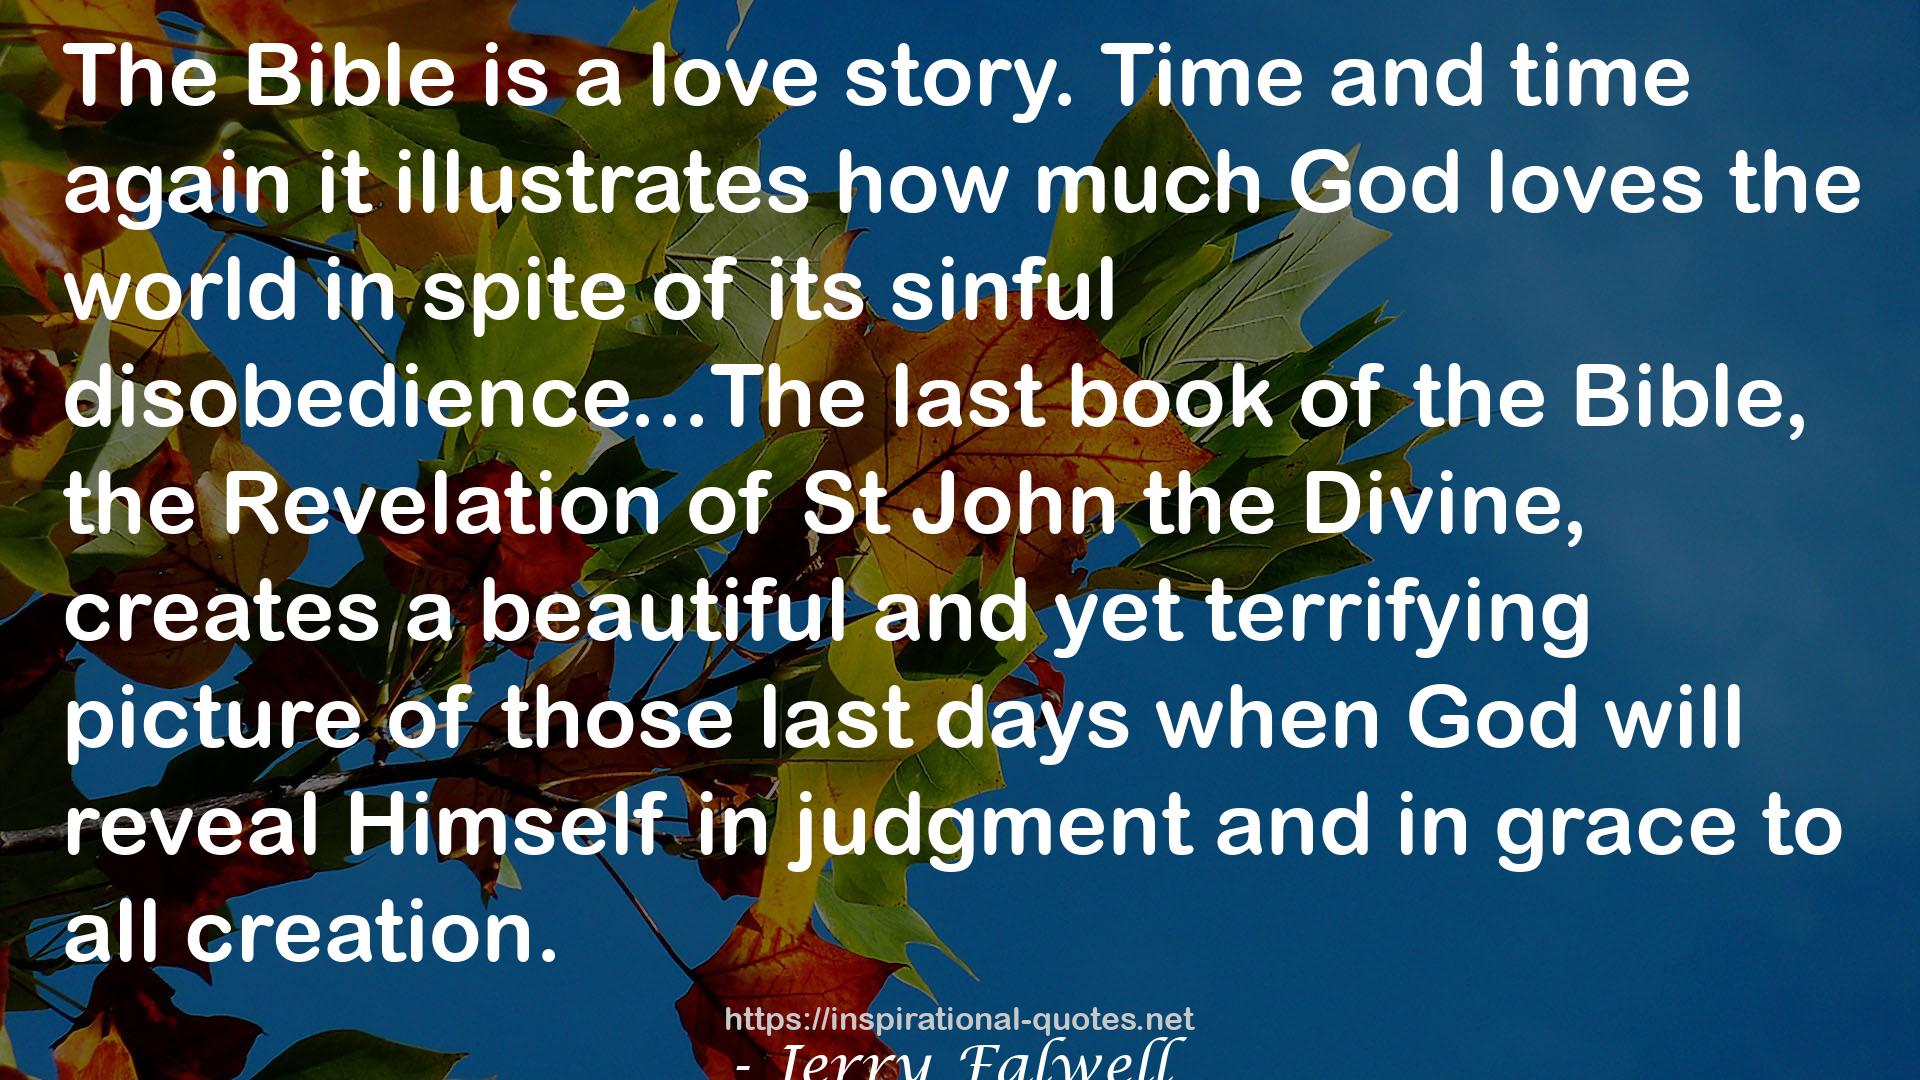 Jerry Falwell QUOTES